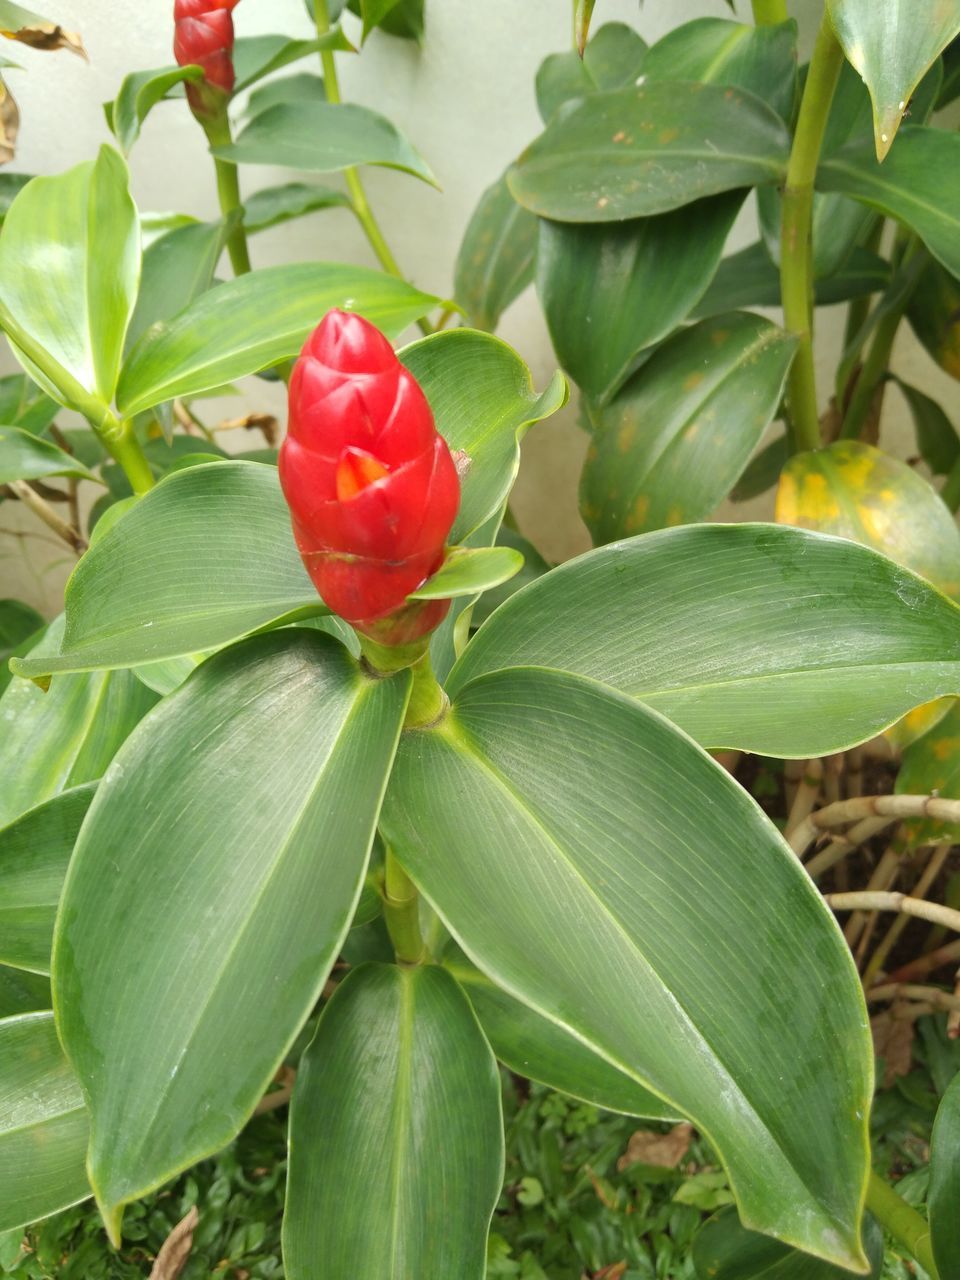 plant, leaf, plant part, flower, flowering plant, beauty in nature, growth, nature, green, freshness, close-up, red, petal, no people, inflorescence, flower head, fragility, food, fruit, outdoors, food and drink, botany